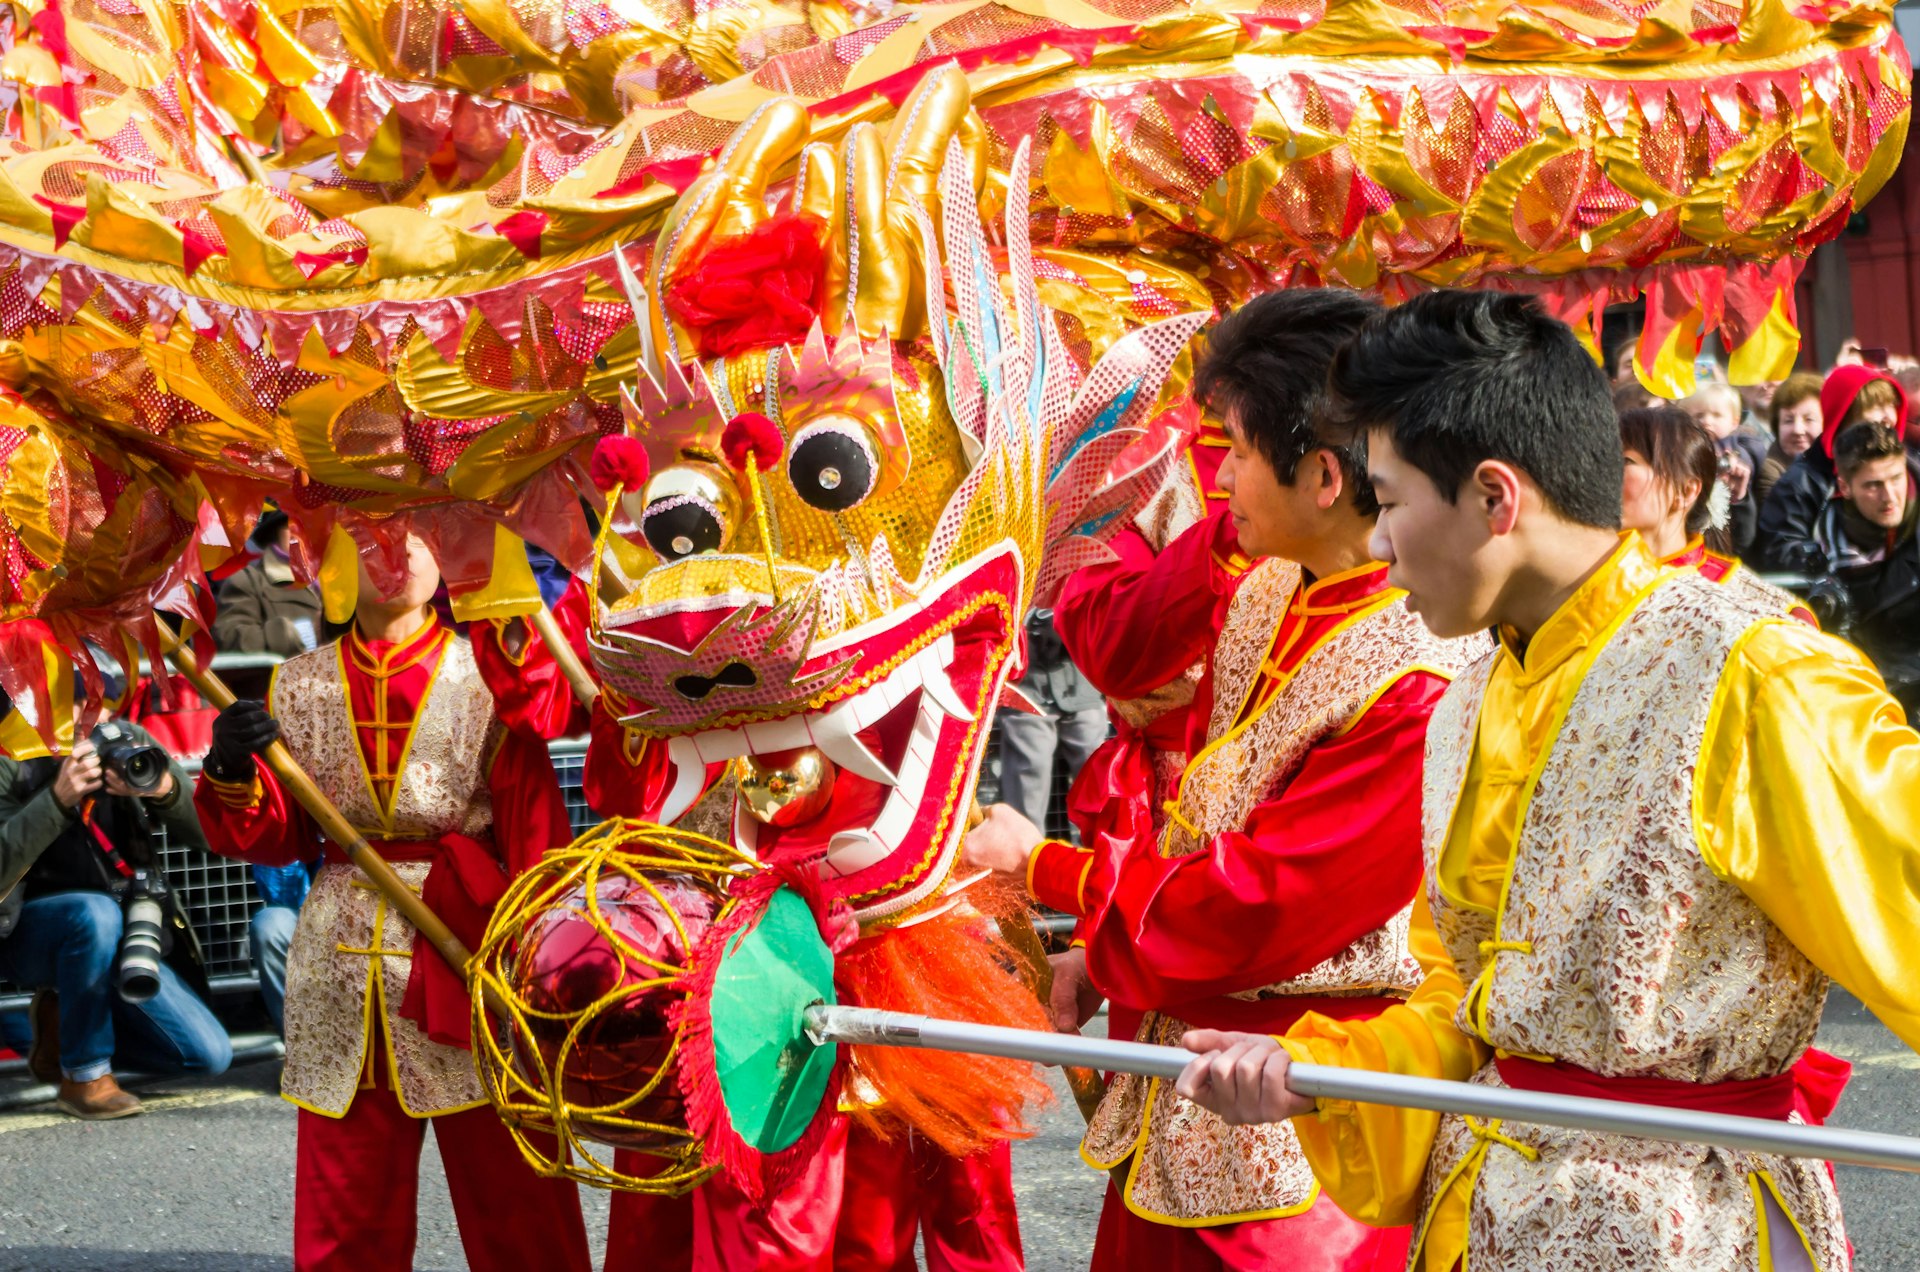 A gold-and-red dragon in the streets surrounded by people dressed in traditional Chinese clothing